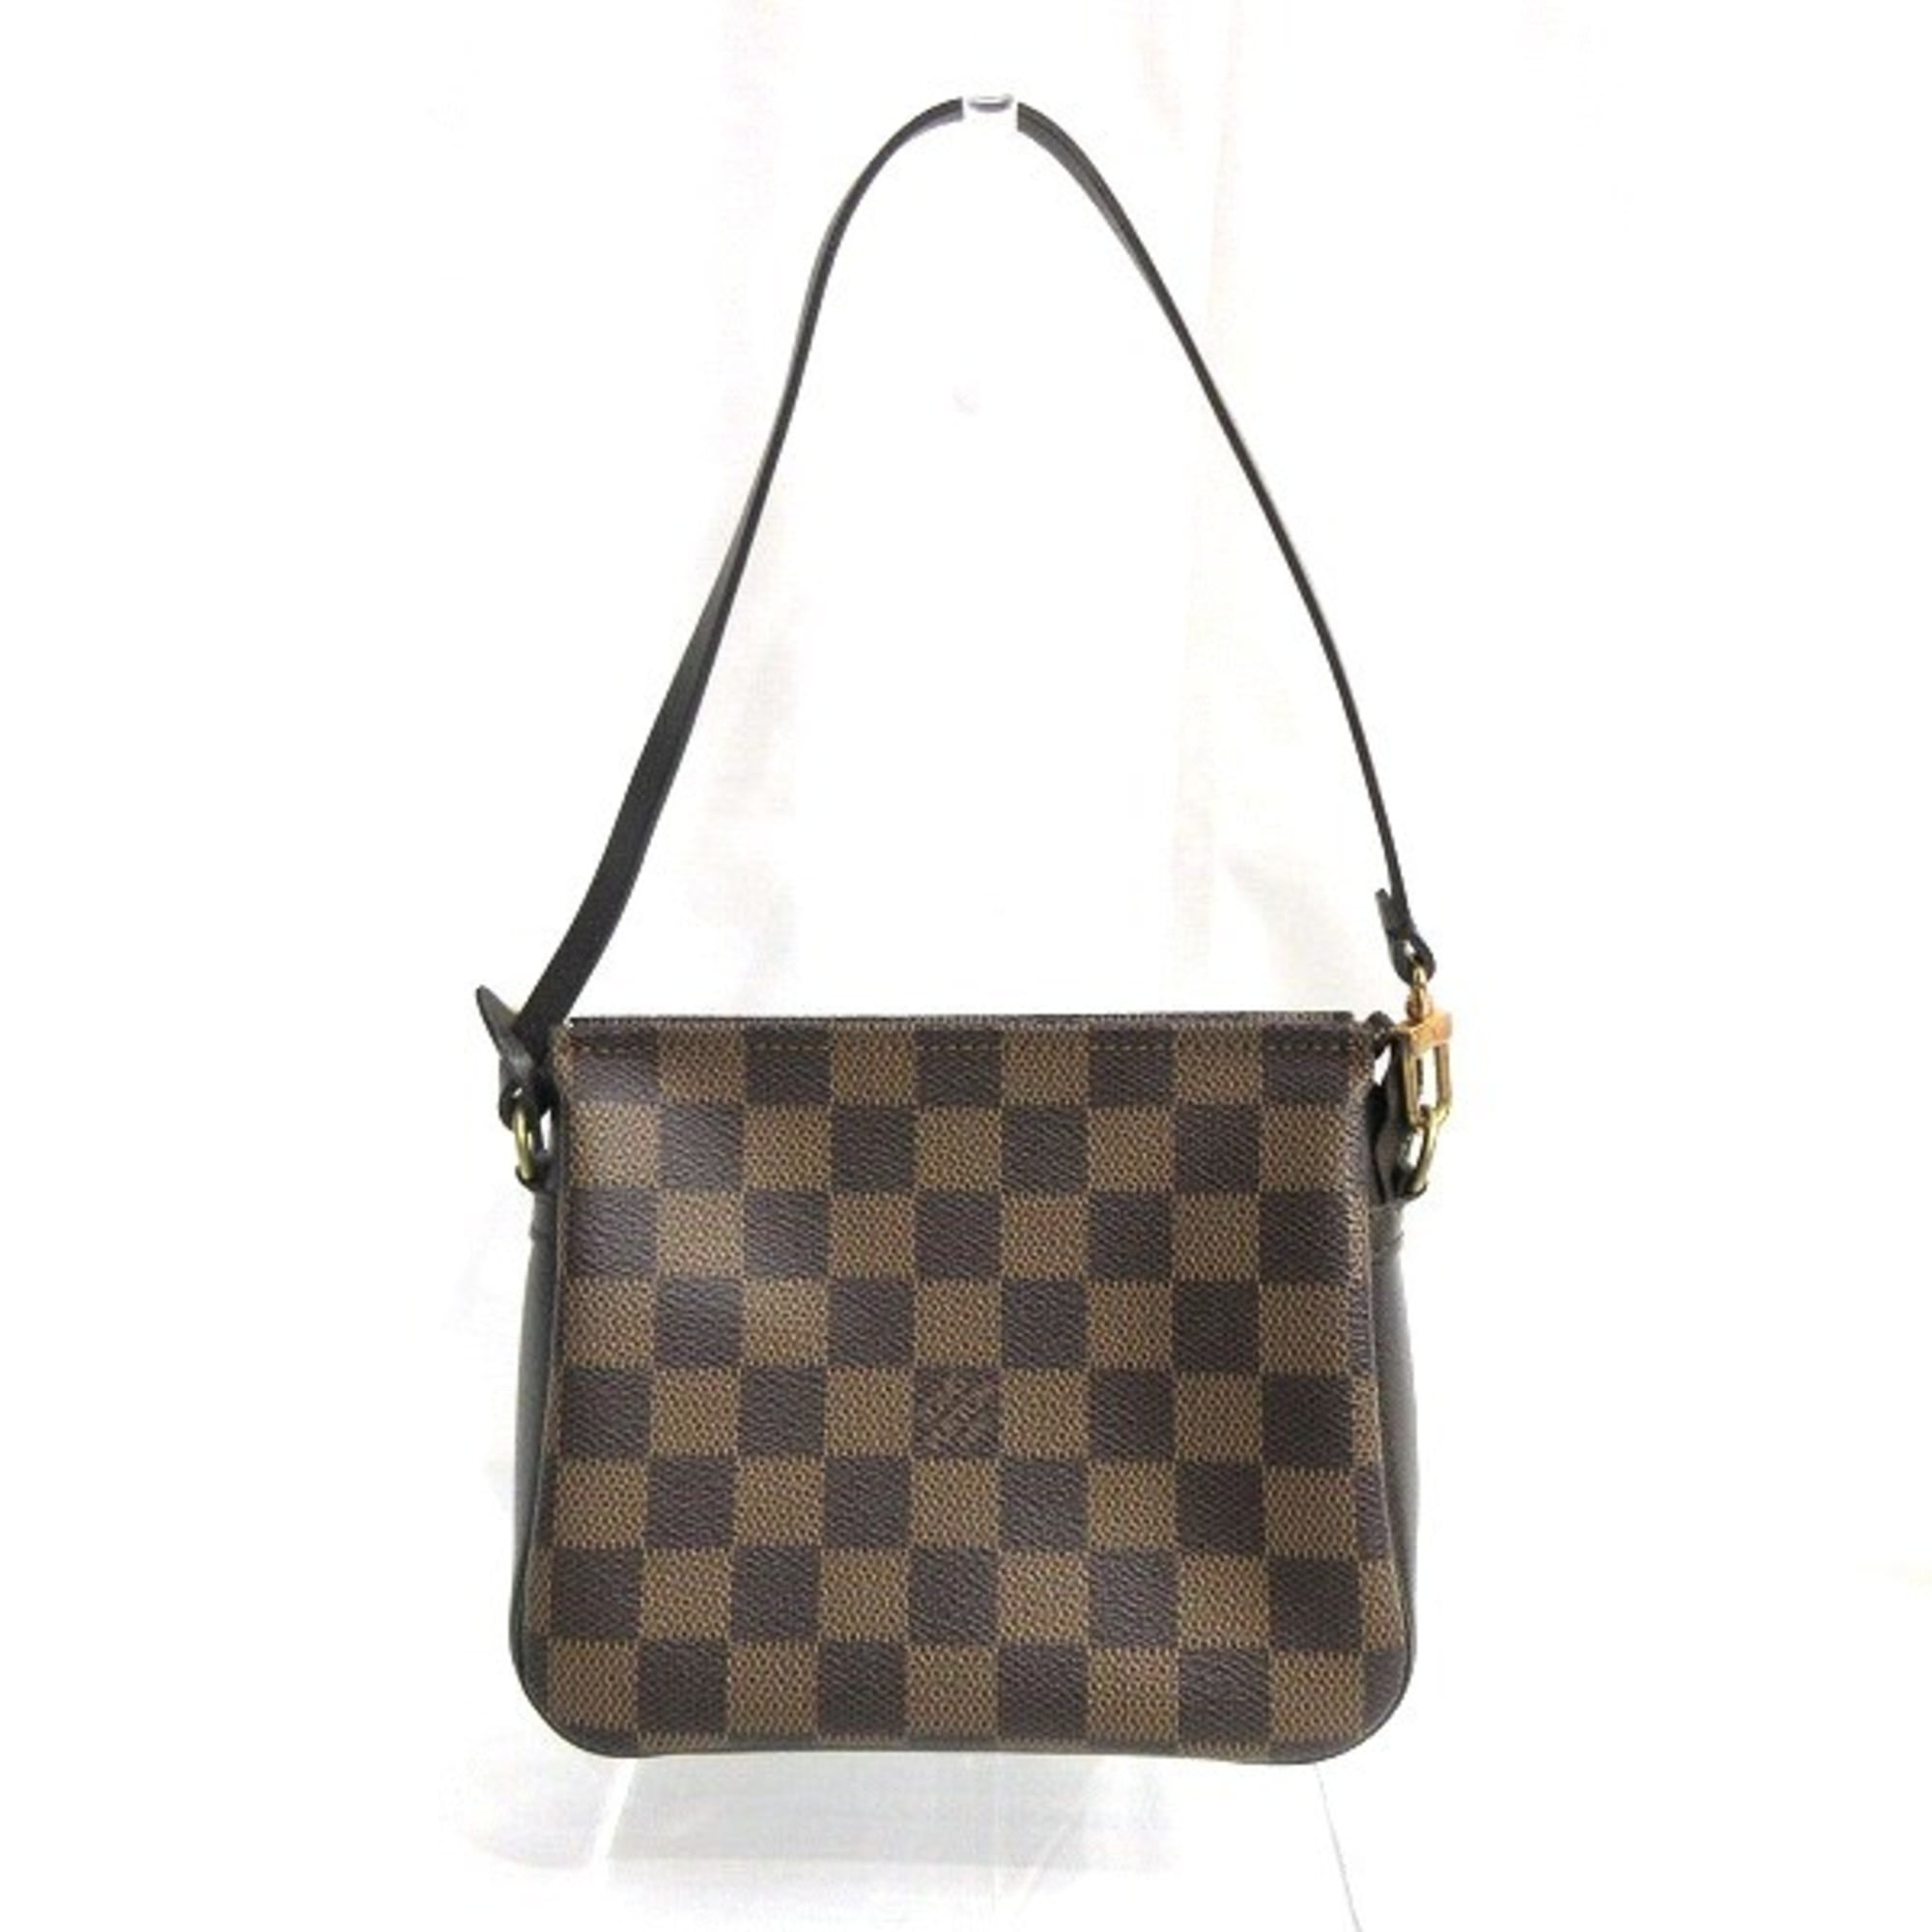 Authenticated Used Louis Vuitton Damier Truth Makeup N51982 Bag